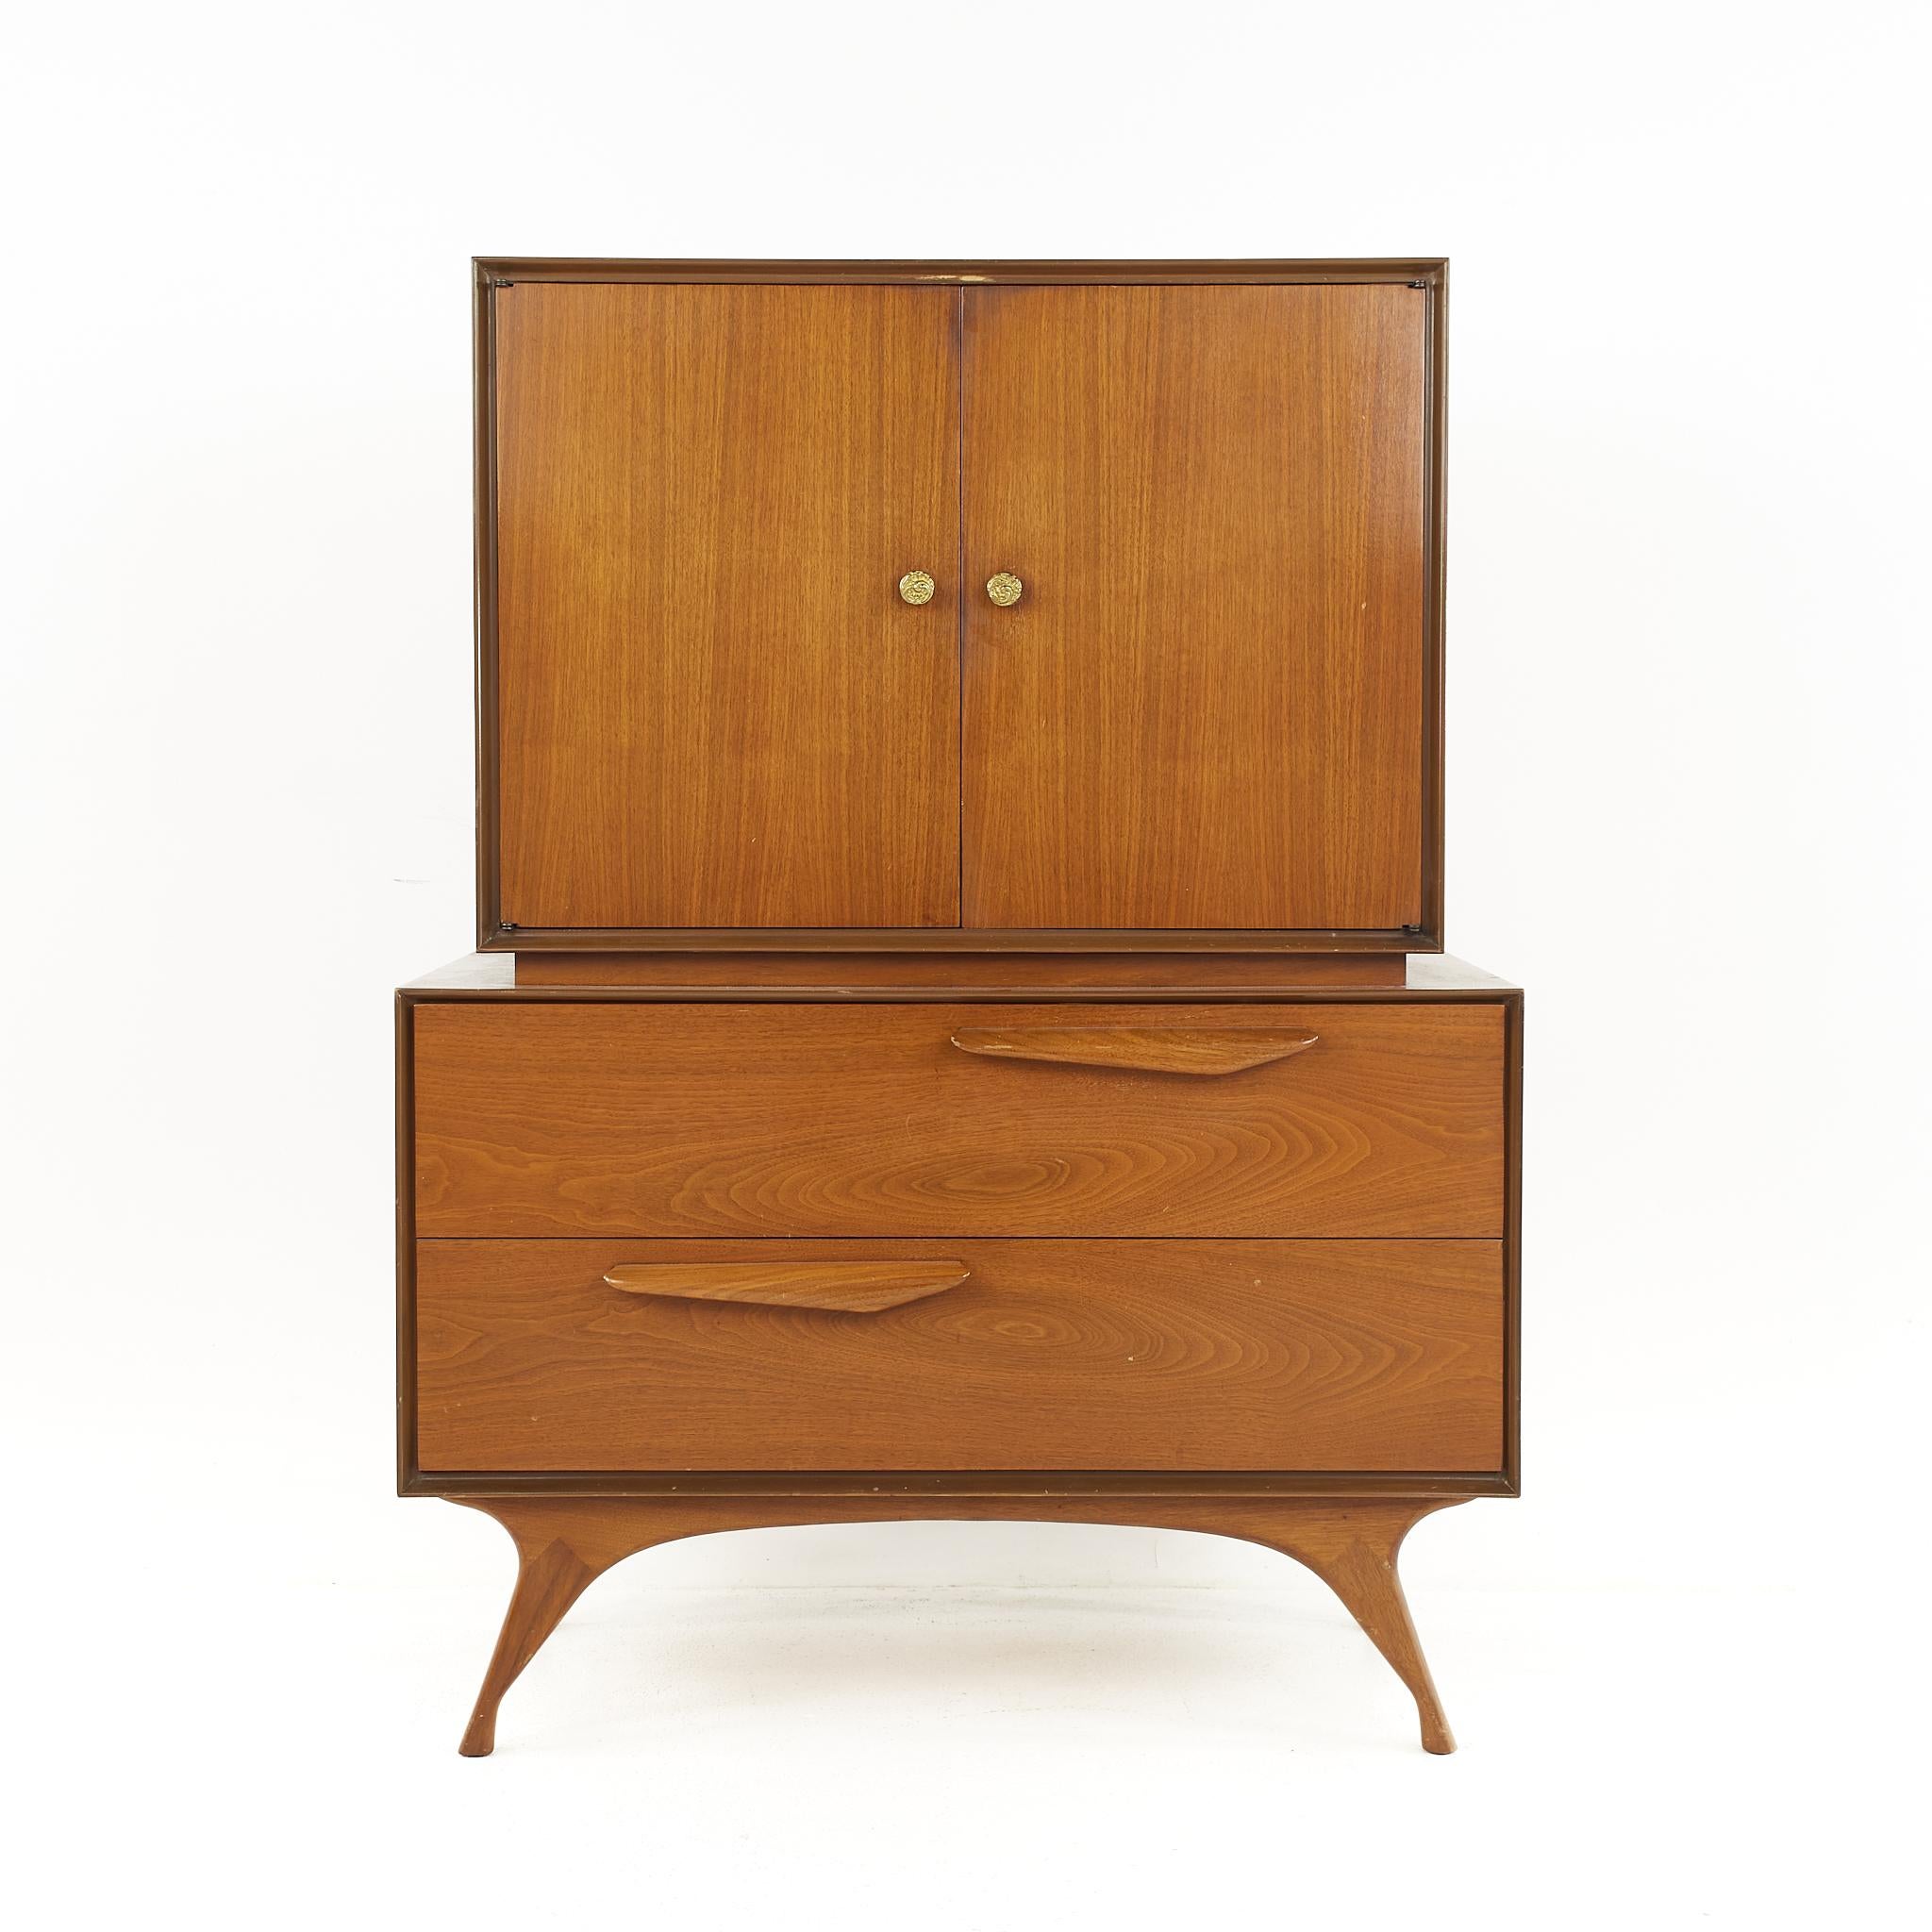 Mid century sculpted walnut highboy armoire gentlemans chest

This armoire measures: 37.5 wide x 20 deep x 50.25 inches high

All pieces of furniture can be had in what we call restored vintage condition. That means the piece is restored upon